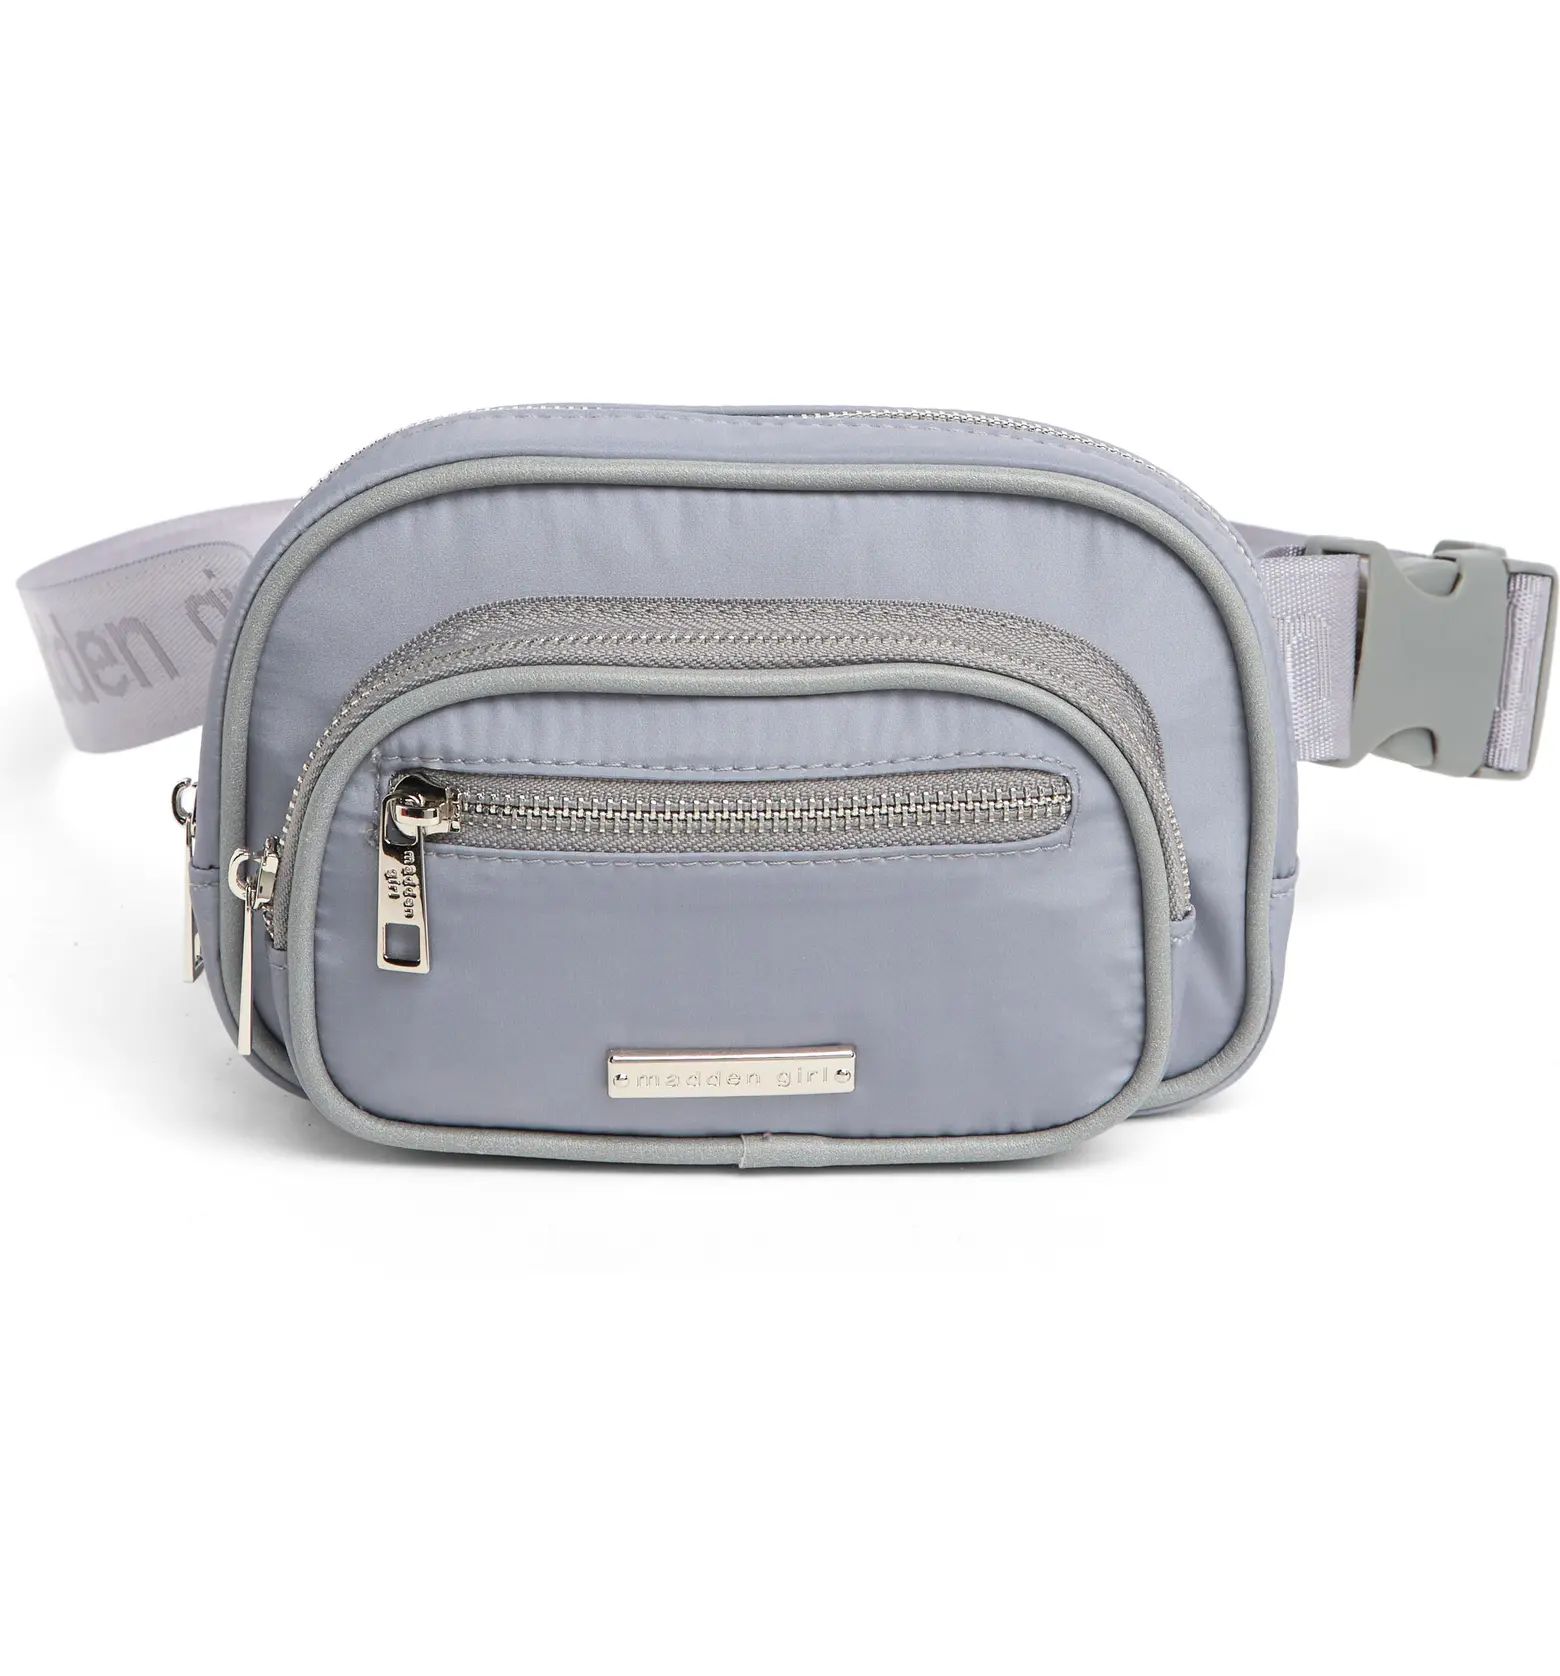 Recycled Fanny Pack | Nordstrom Rack